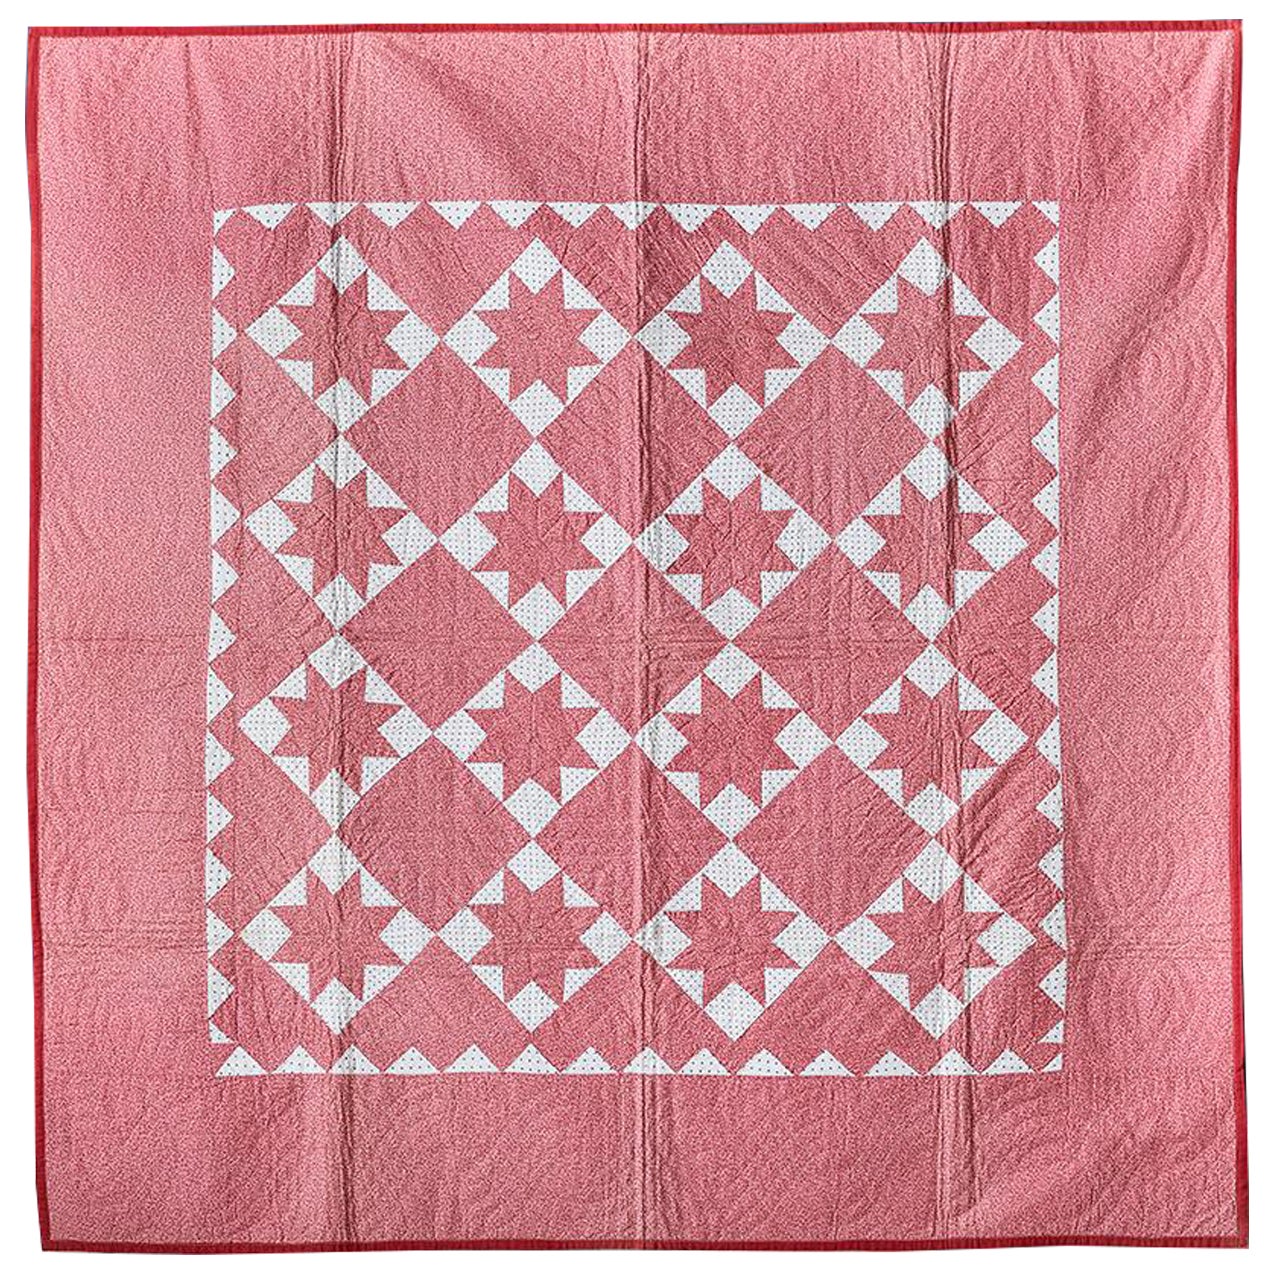 Antique Patchwork Quilt "Le Moyne Stars" in Dark Pink and White, USA, 1880's